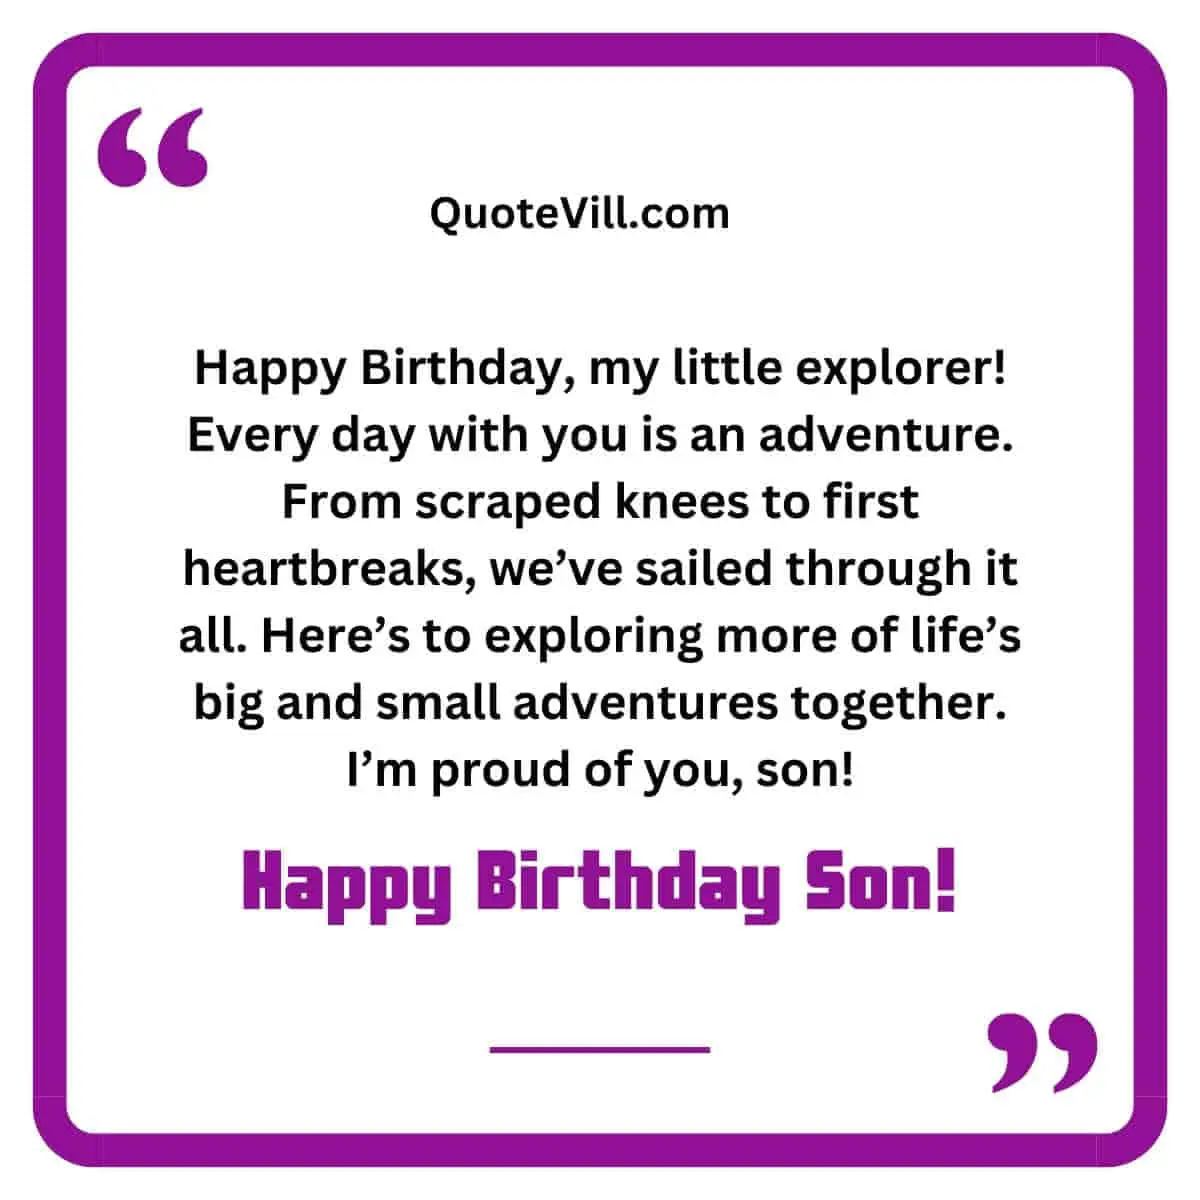 Unique Happy Birthday Wishes for Son from Mom